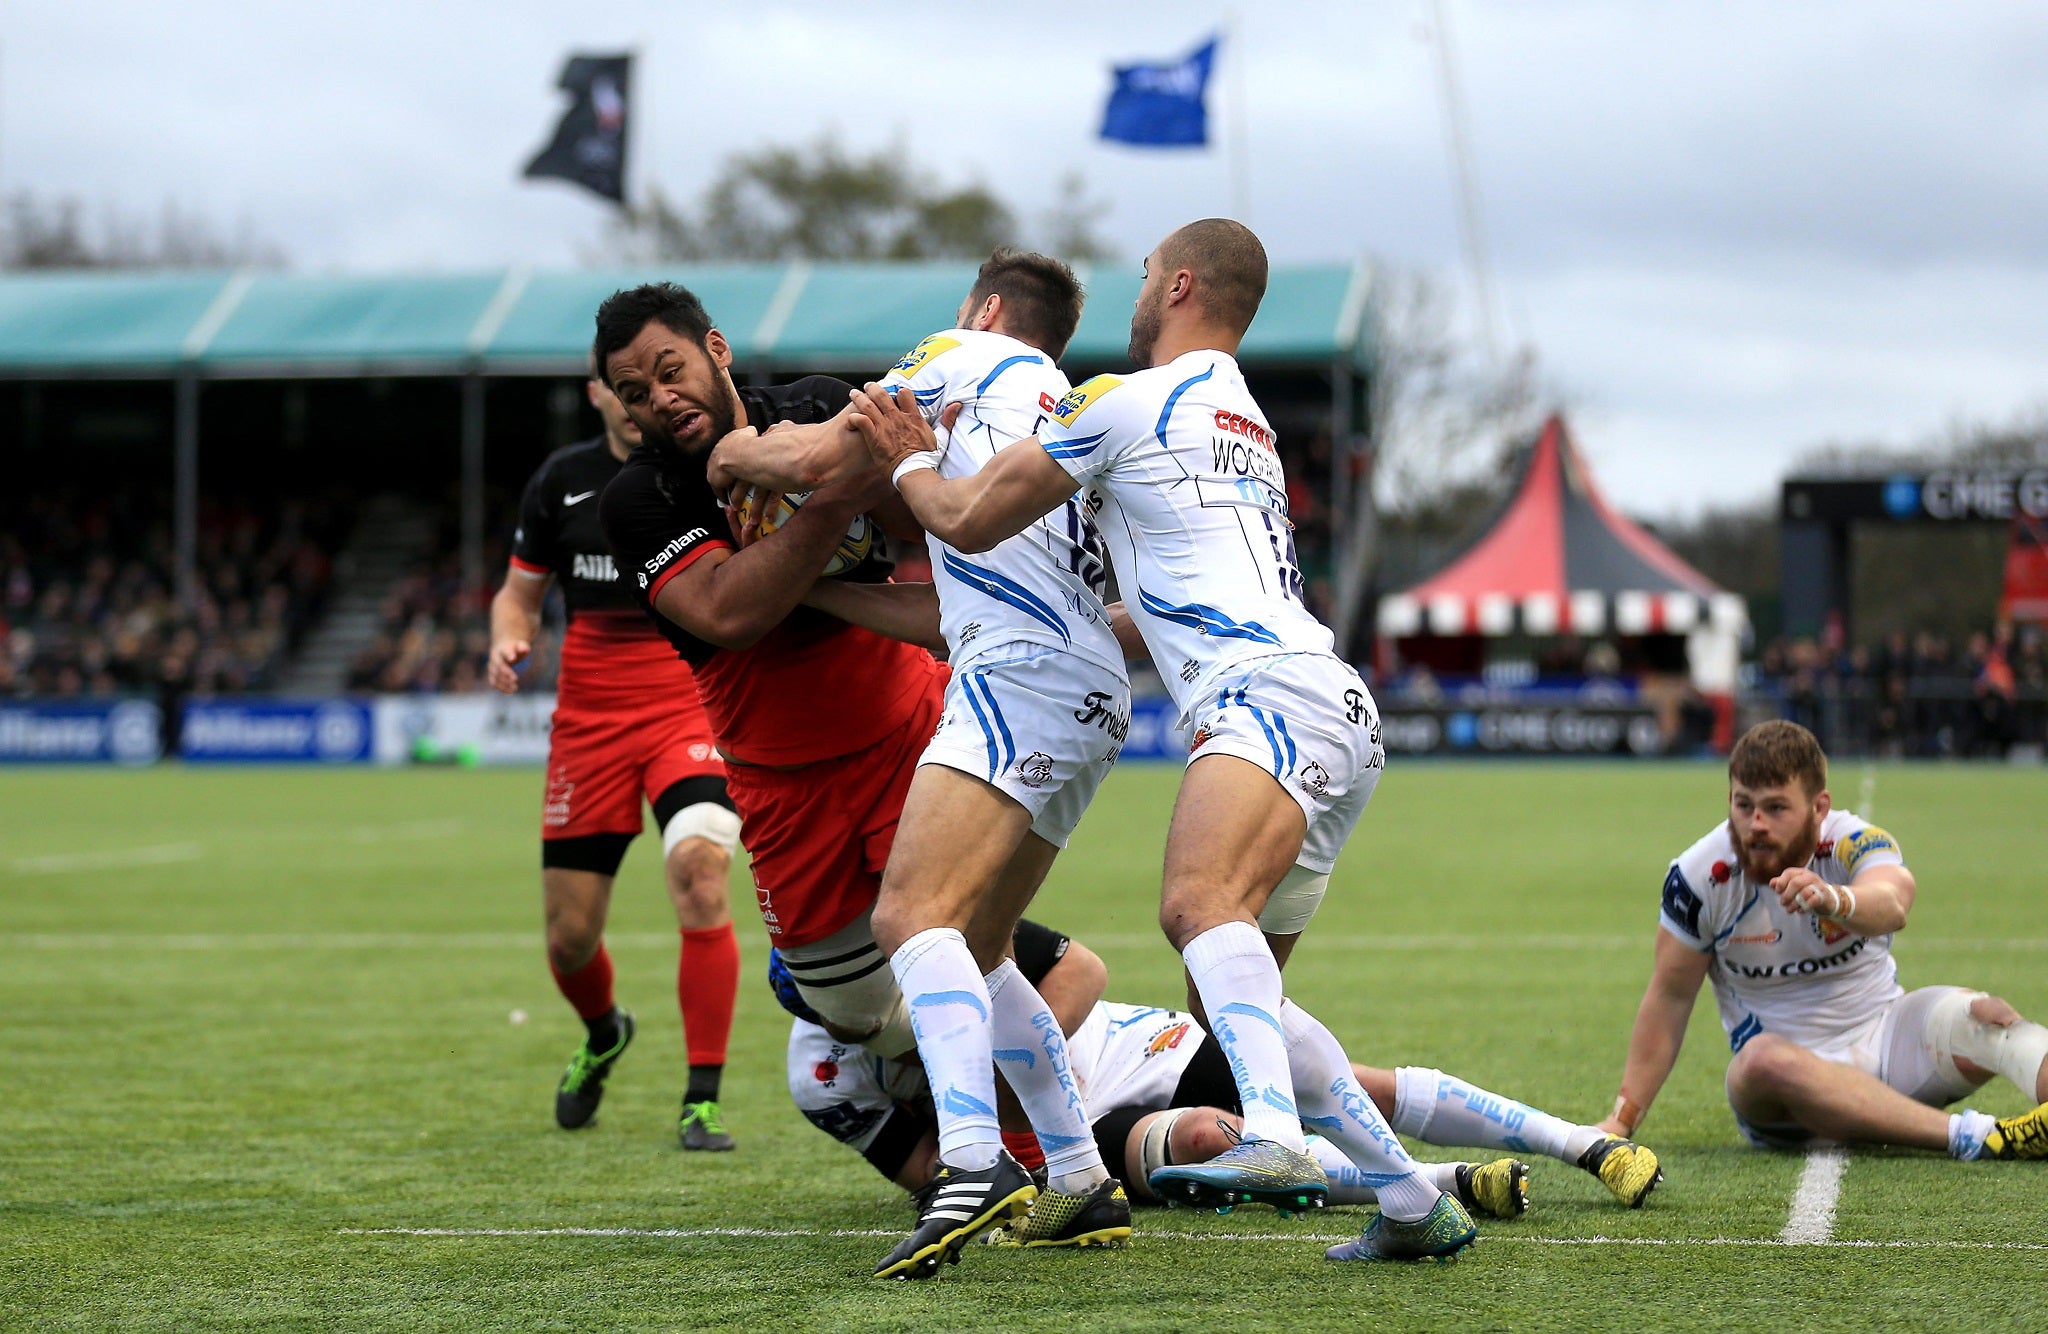 Vunipola continued his good form from the Six Nations on his return for Saracens